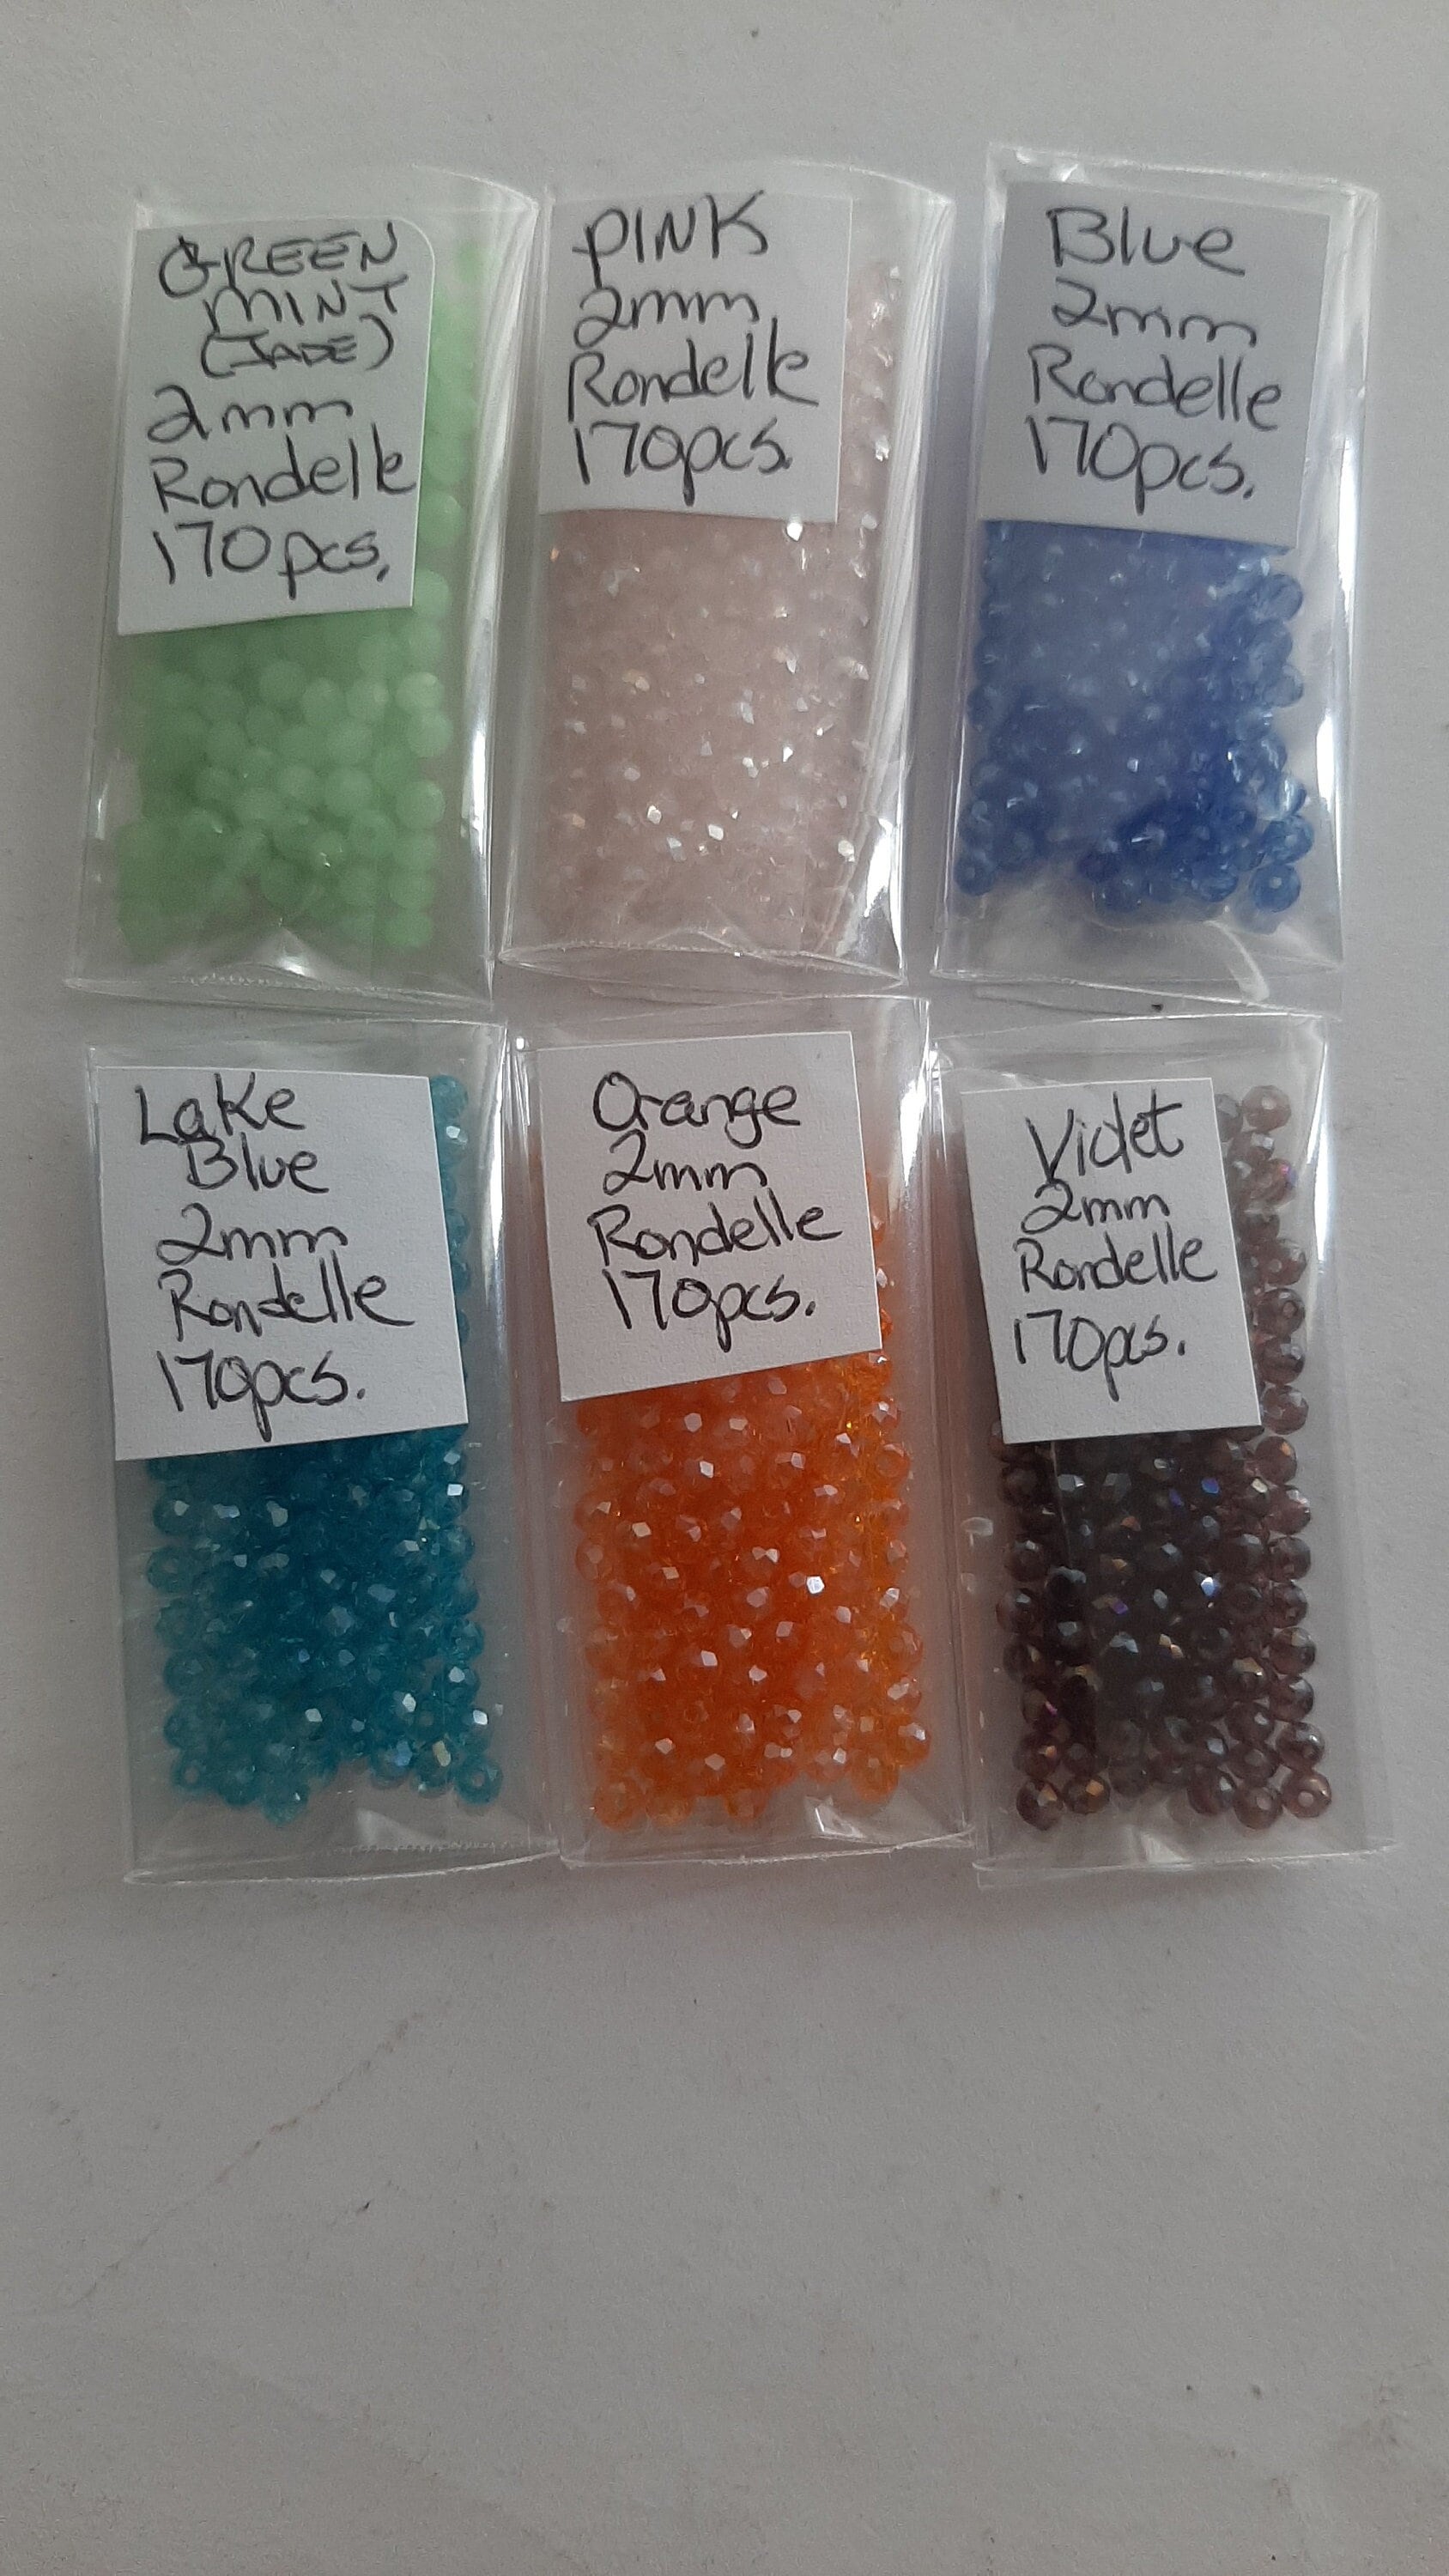 Wholesale- 8mm Rondelle Crystals for Jewelry making,Bead spacers, Chinese  crystals, variety of colors